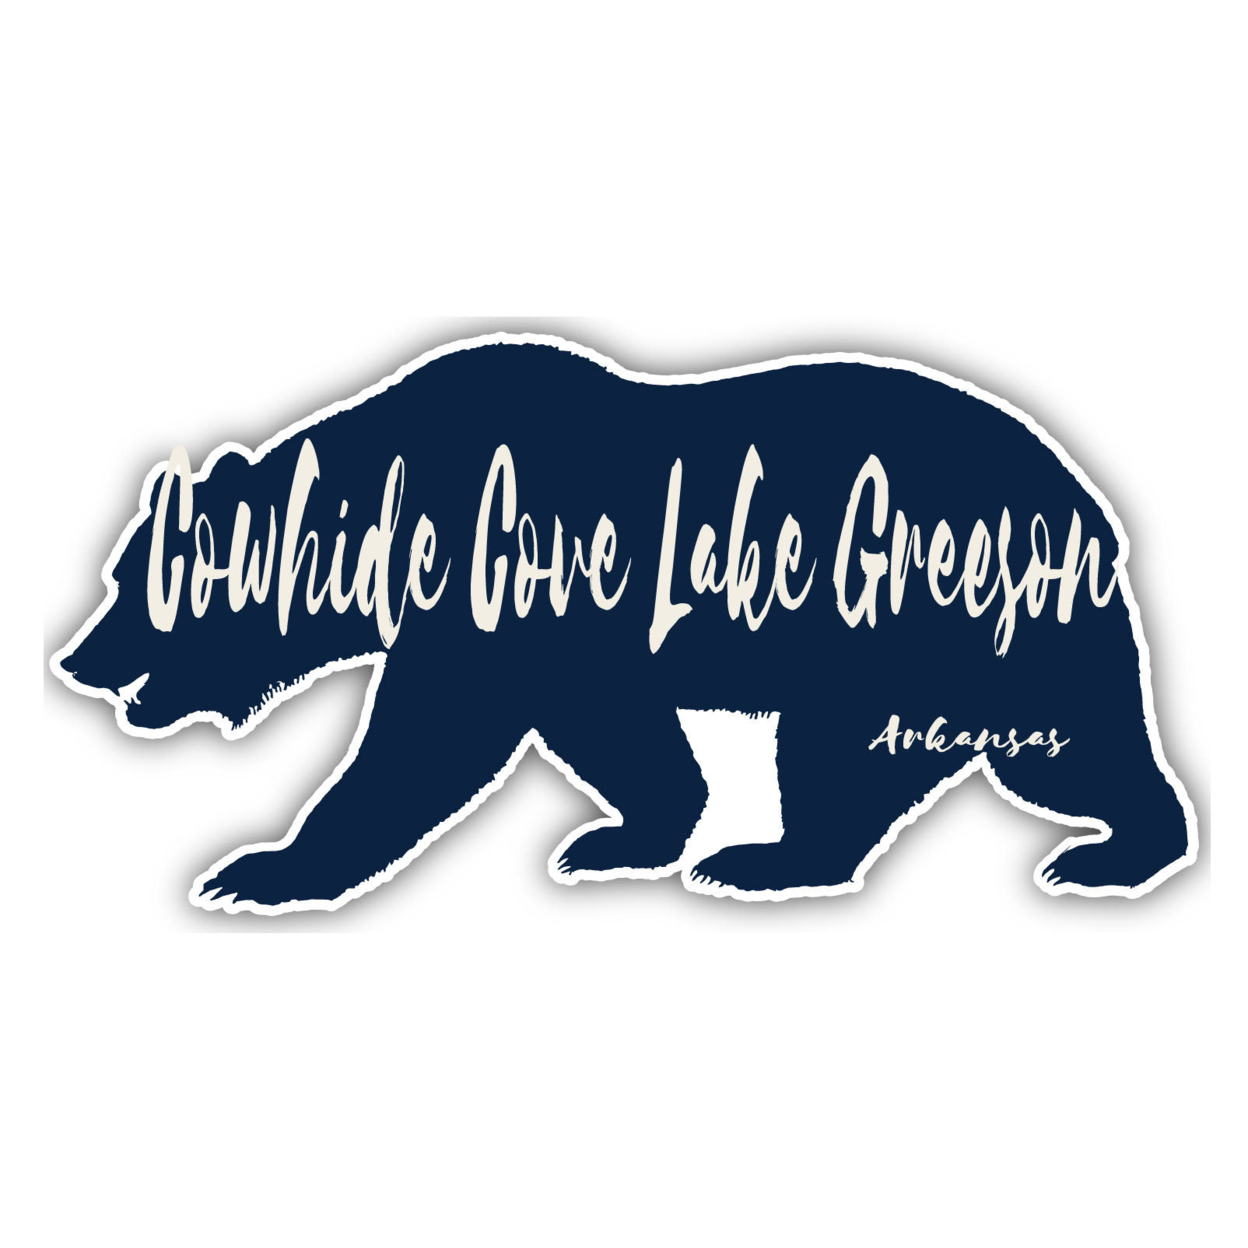 Cowhide Cove Lake Greeson Arkansas Souvenir Decorative Stickers (Choose Theme And Size) - 4-Pack, 2-Inch, Tent